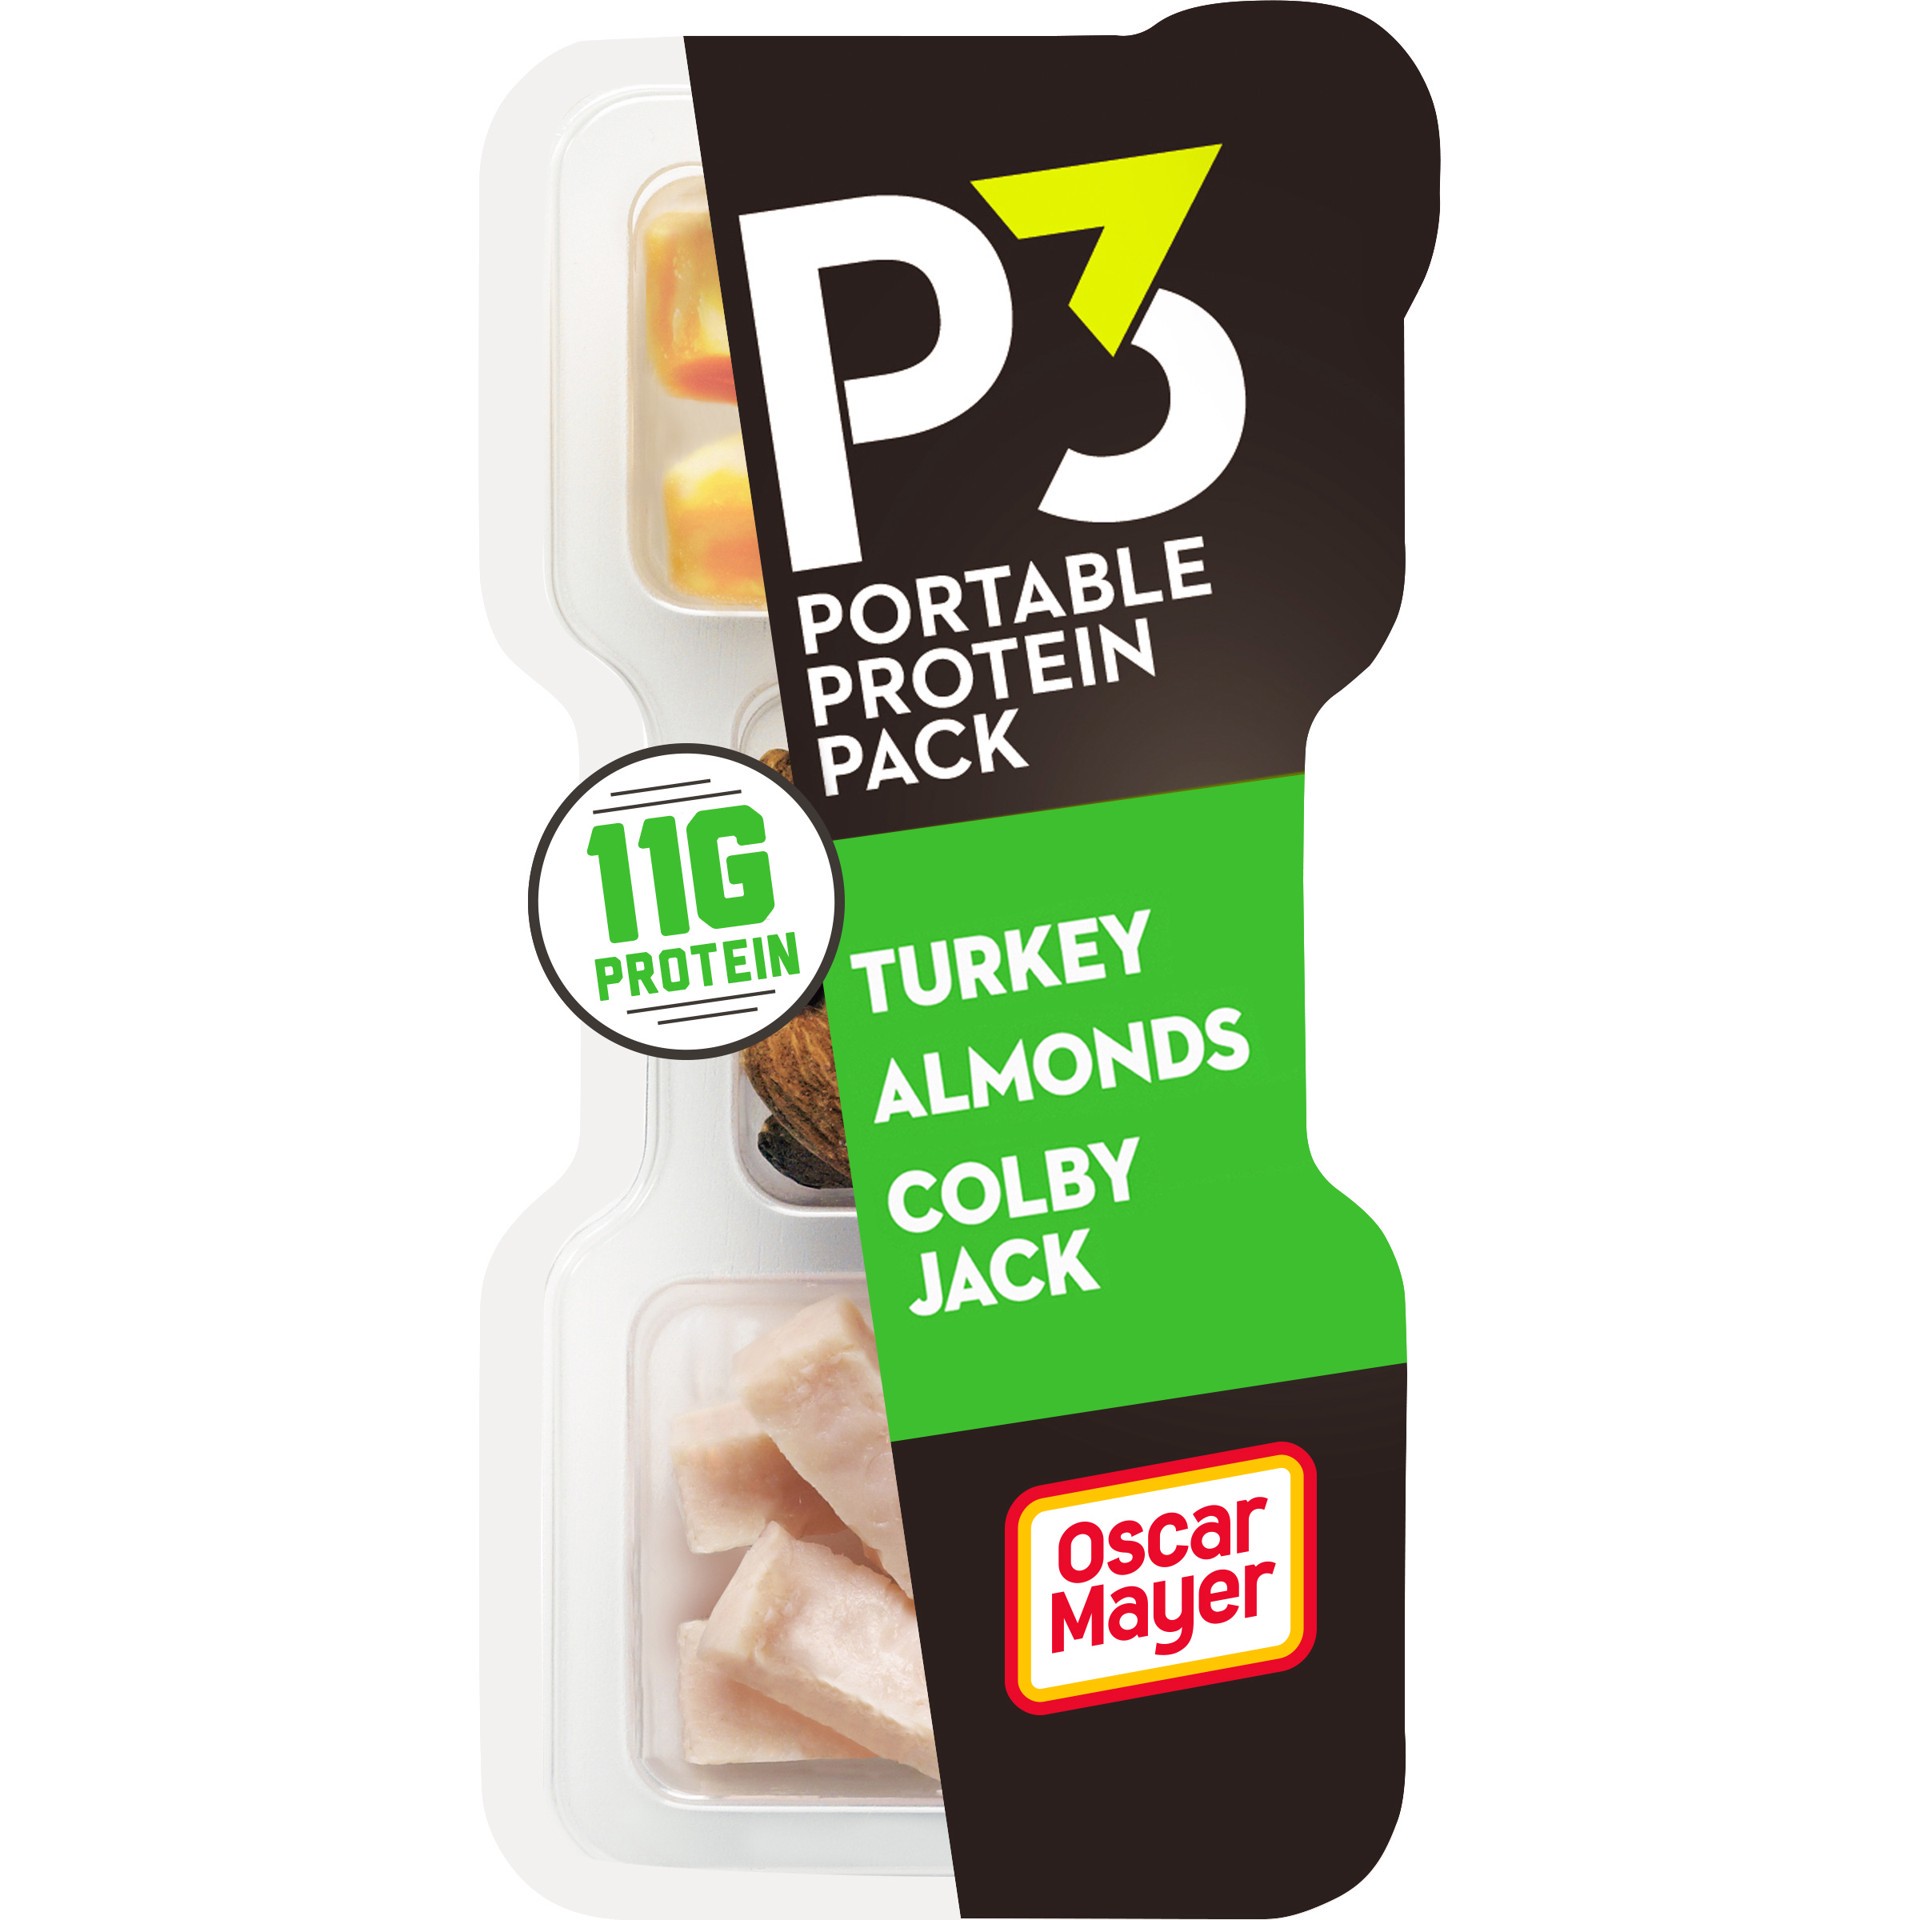 slide 1 of 14, P3 Portable Protein Snack Pack with Turkey, Almonds & Colby Jack Cheese Tray, 2 oz